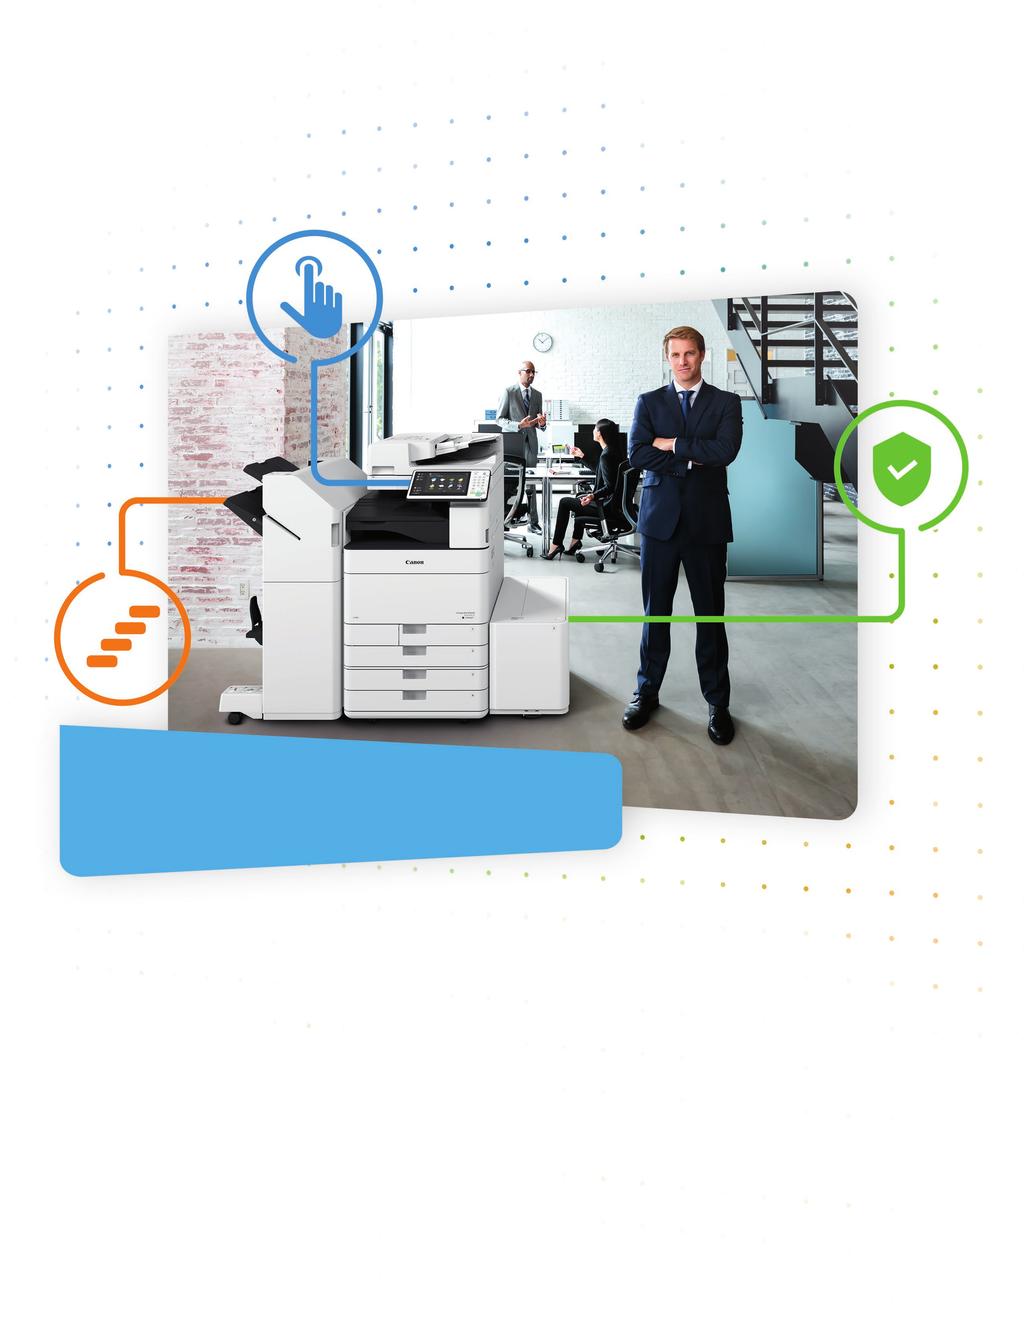 SIMPLIFY. CONTROL. EVOLVE. Everyone from end users to executive management looks to IT professionals for print-related issues and performance at all hours of the day.